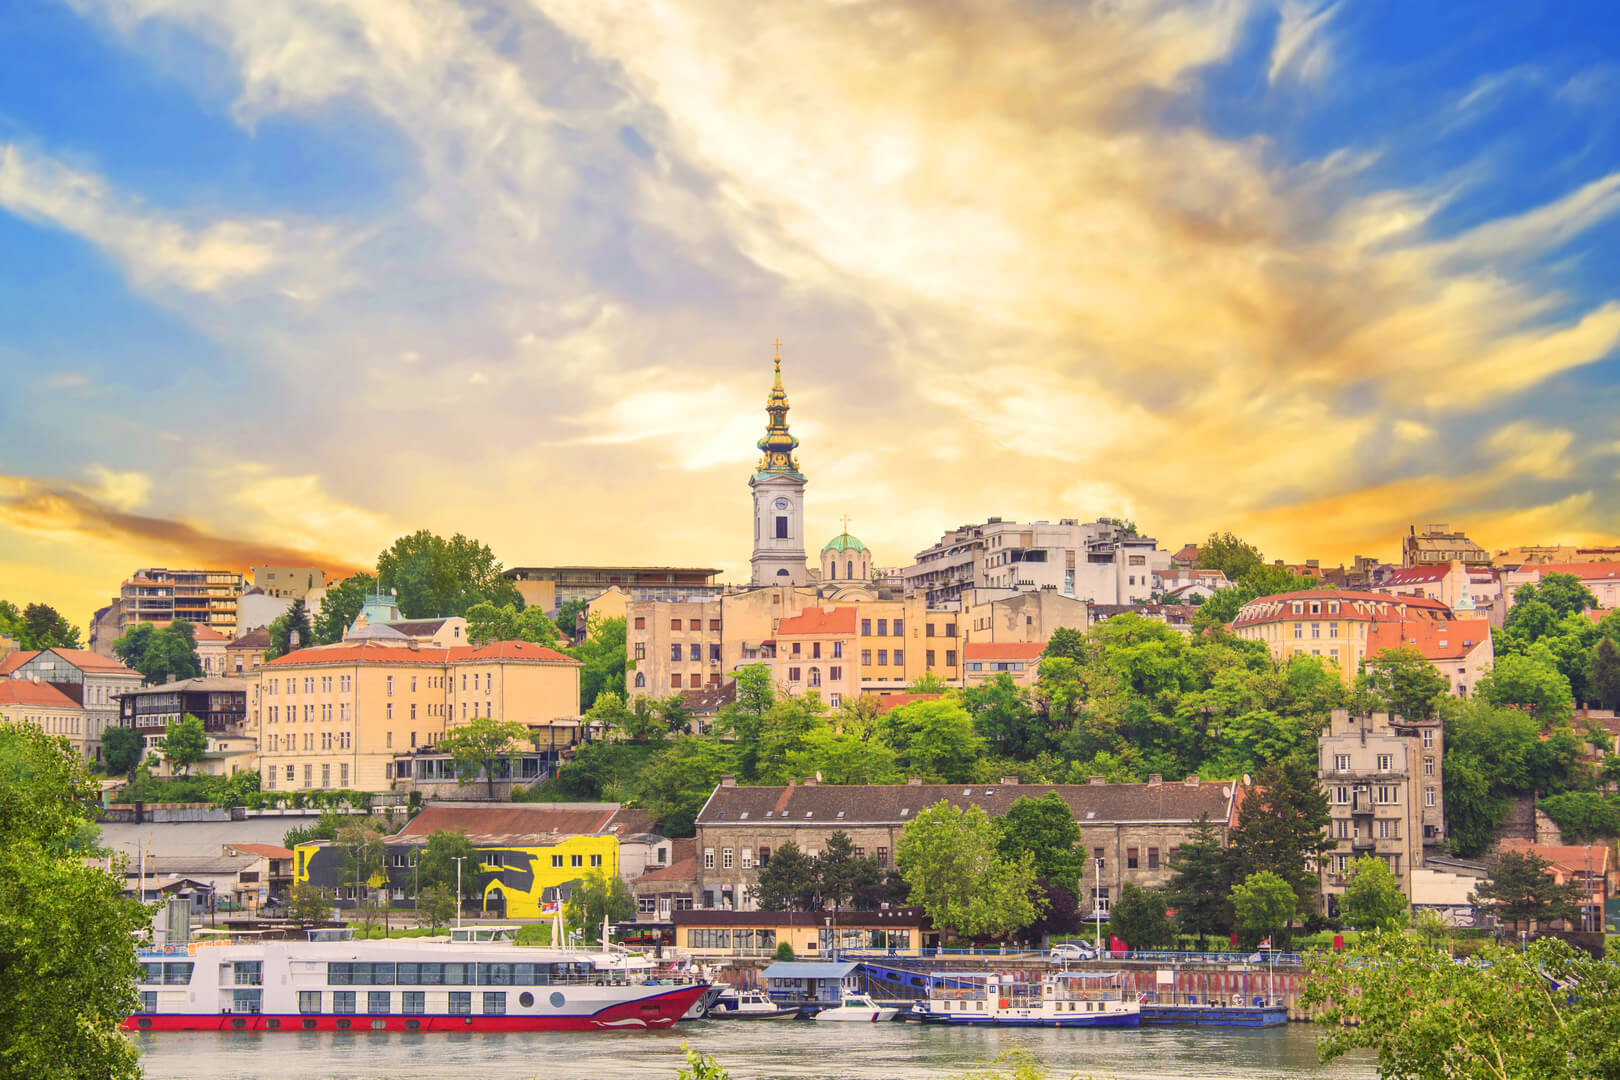 Beautiful view of the historic center of Belgrade on the banks of the Sava River, Serbia